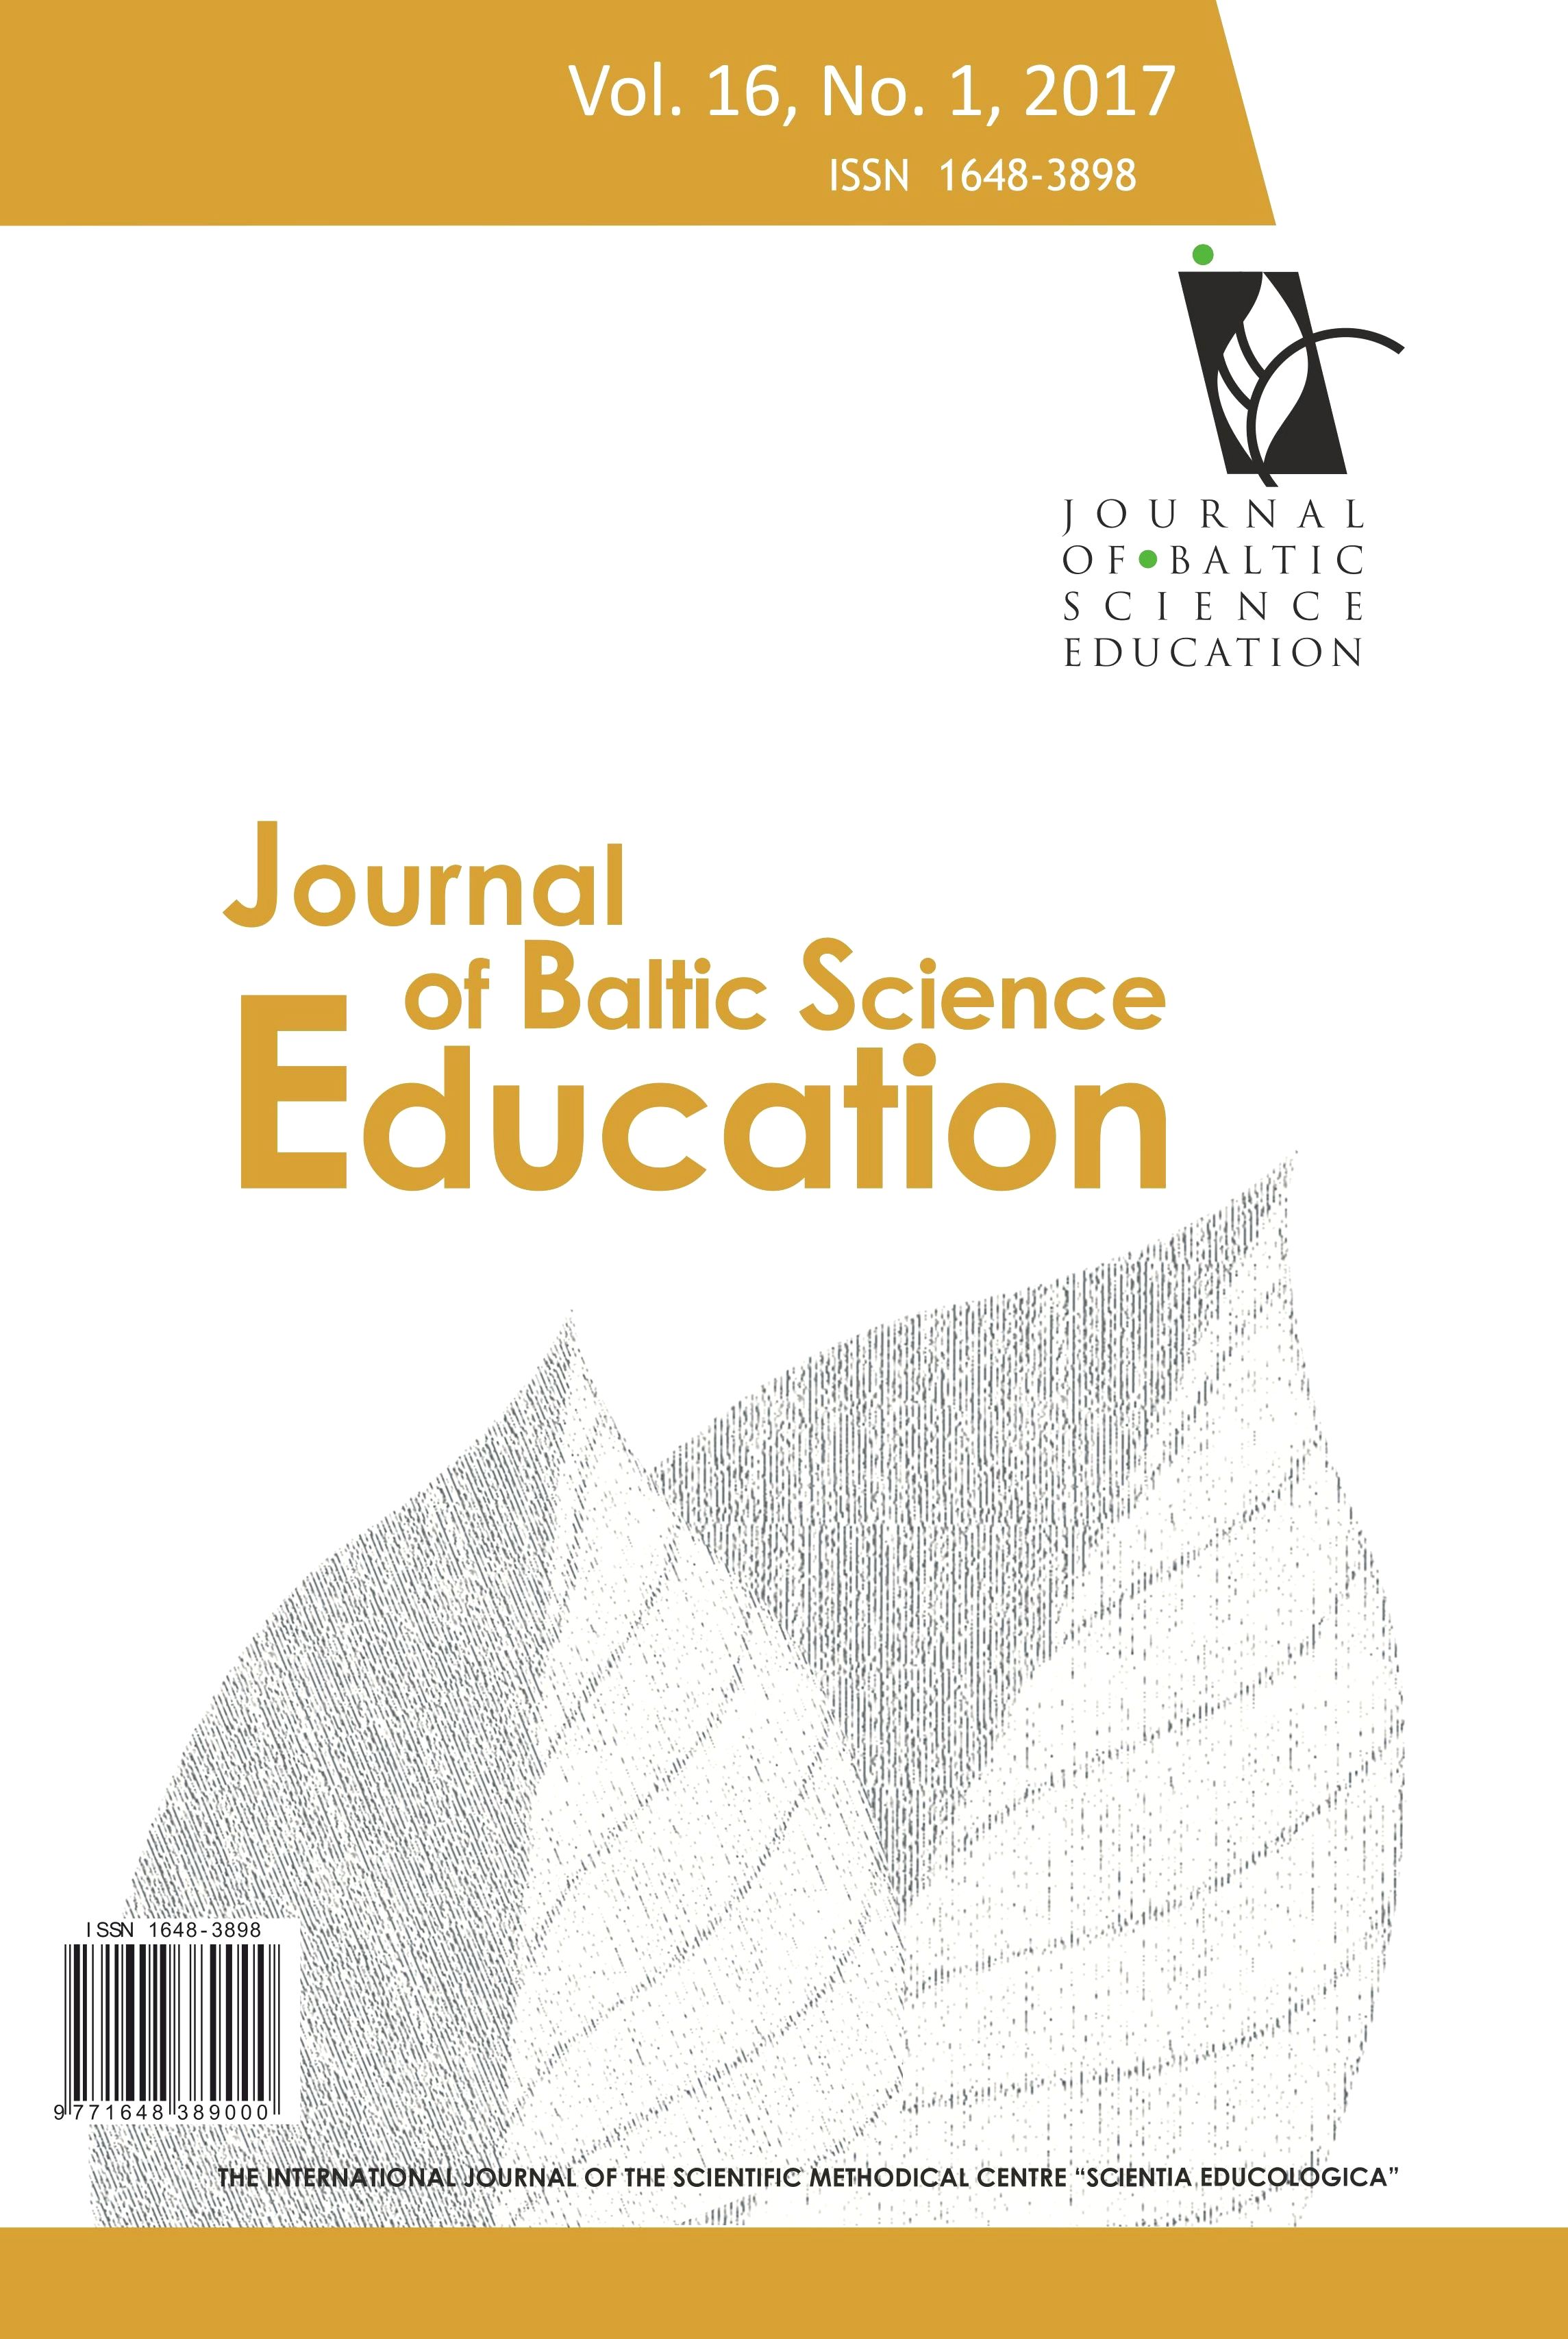 BIOLOGY TEACHING THROUGH SELF-REGULATED LEARNING AND COGNITIVE STRUCTURE: AN ANALYSIS OF THE EFFECT OF LEARNING STRATEGIES FOR COGNITIVE DEVELOPMENT VIA LATENT GROWTH MODEL